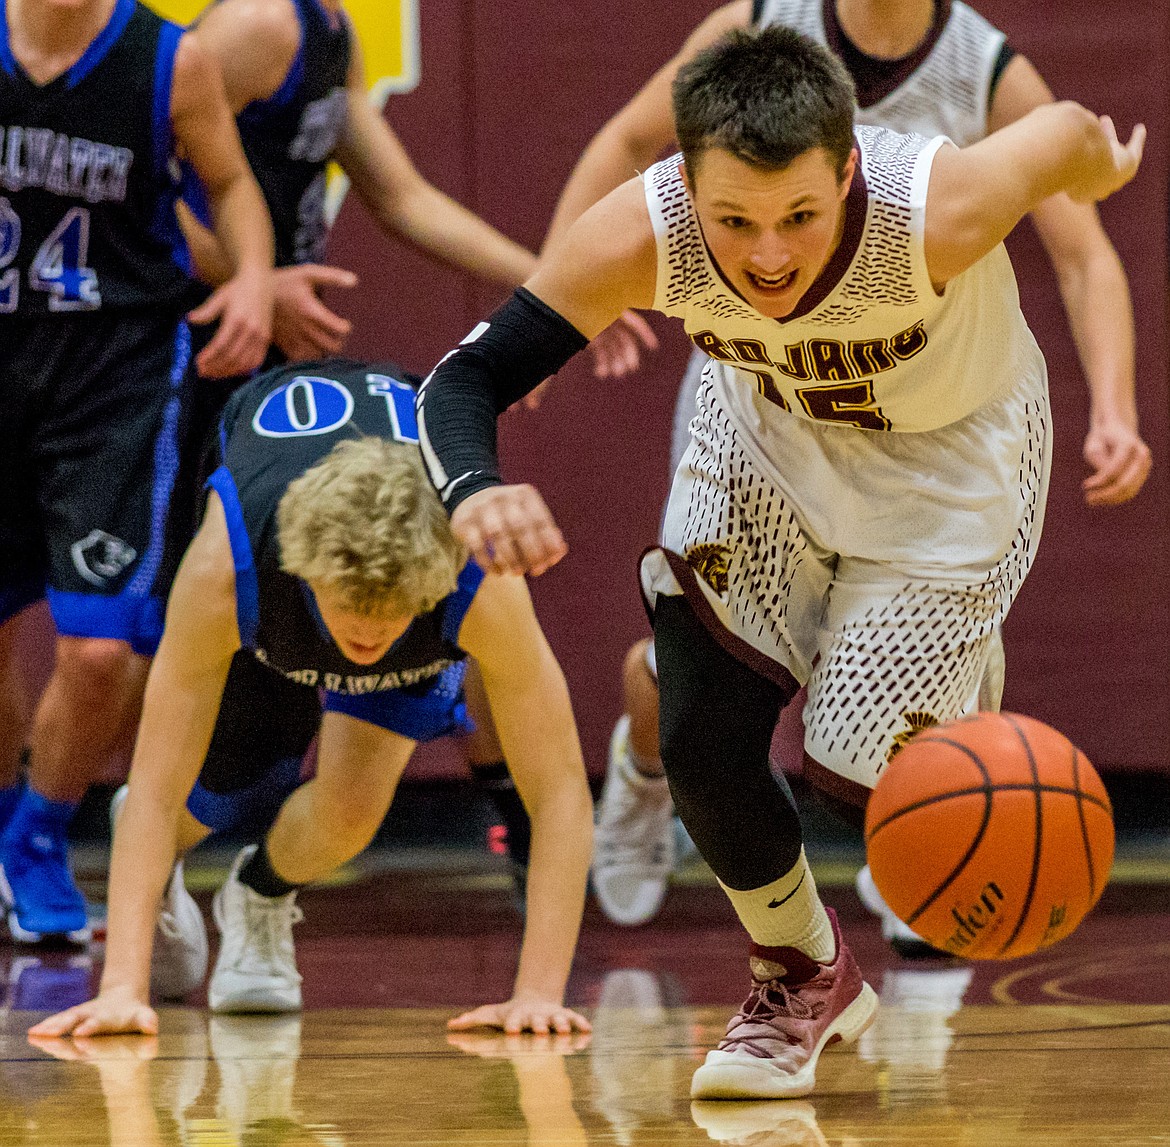 Troy&#146;s Logan Milde chases a loose ball that got away from Stillwater&#146;s Connor Drish Tuesday in Troy. (John Blodgett/The Western News)